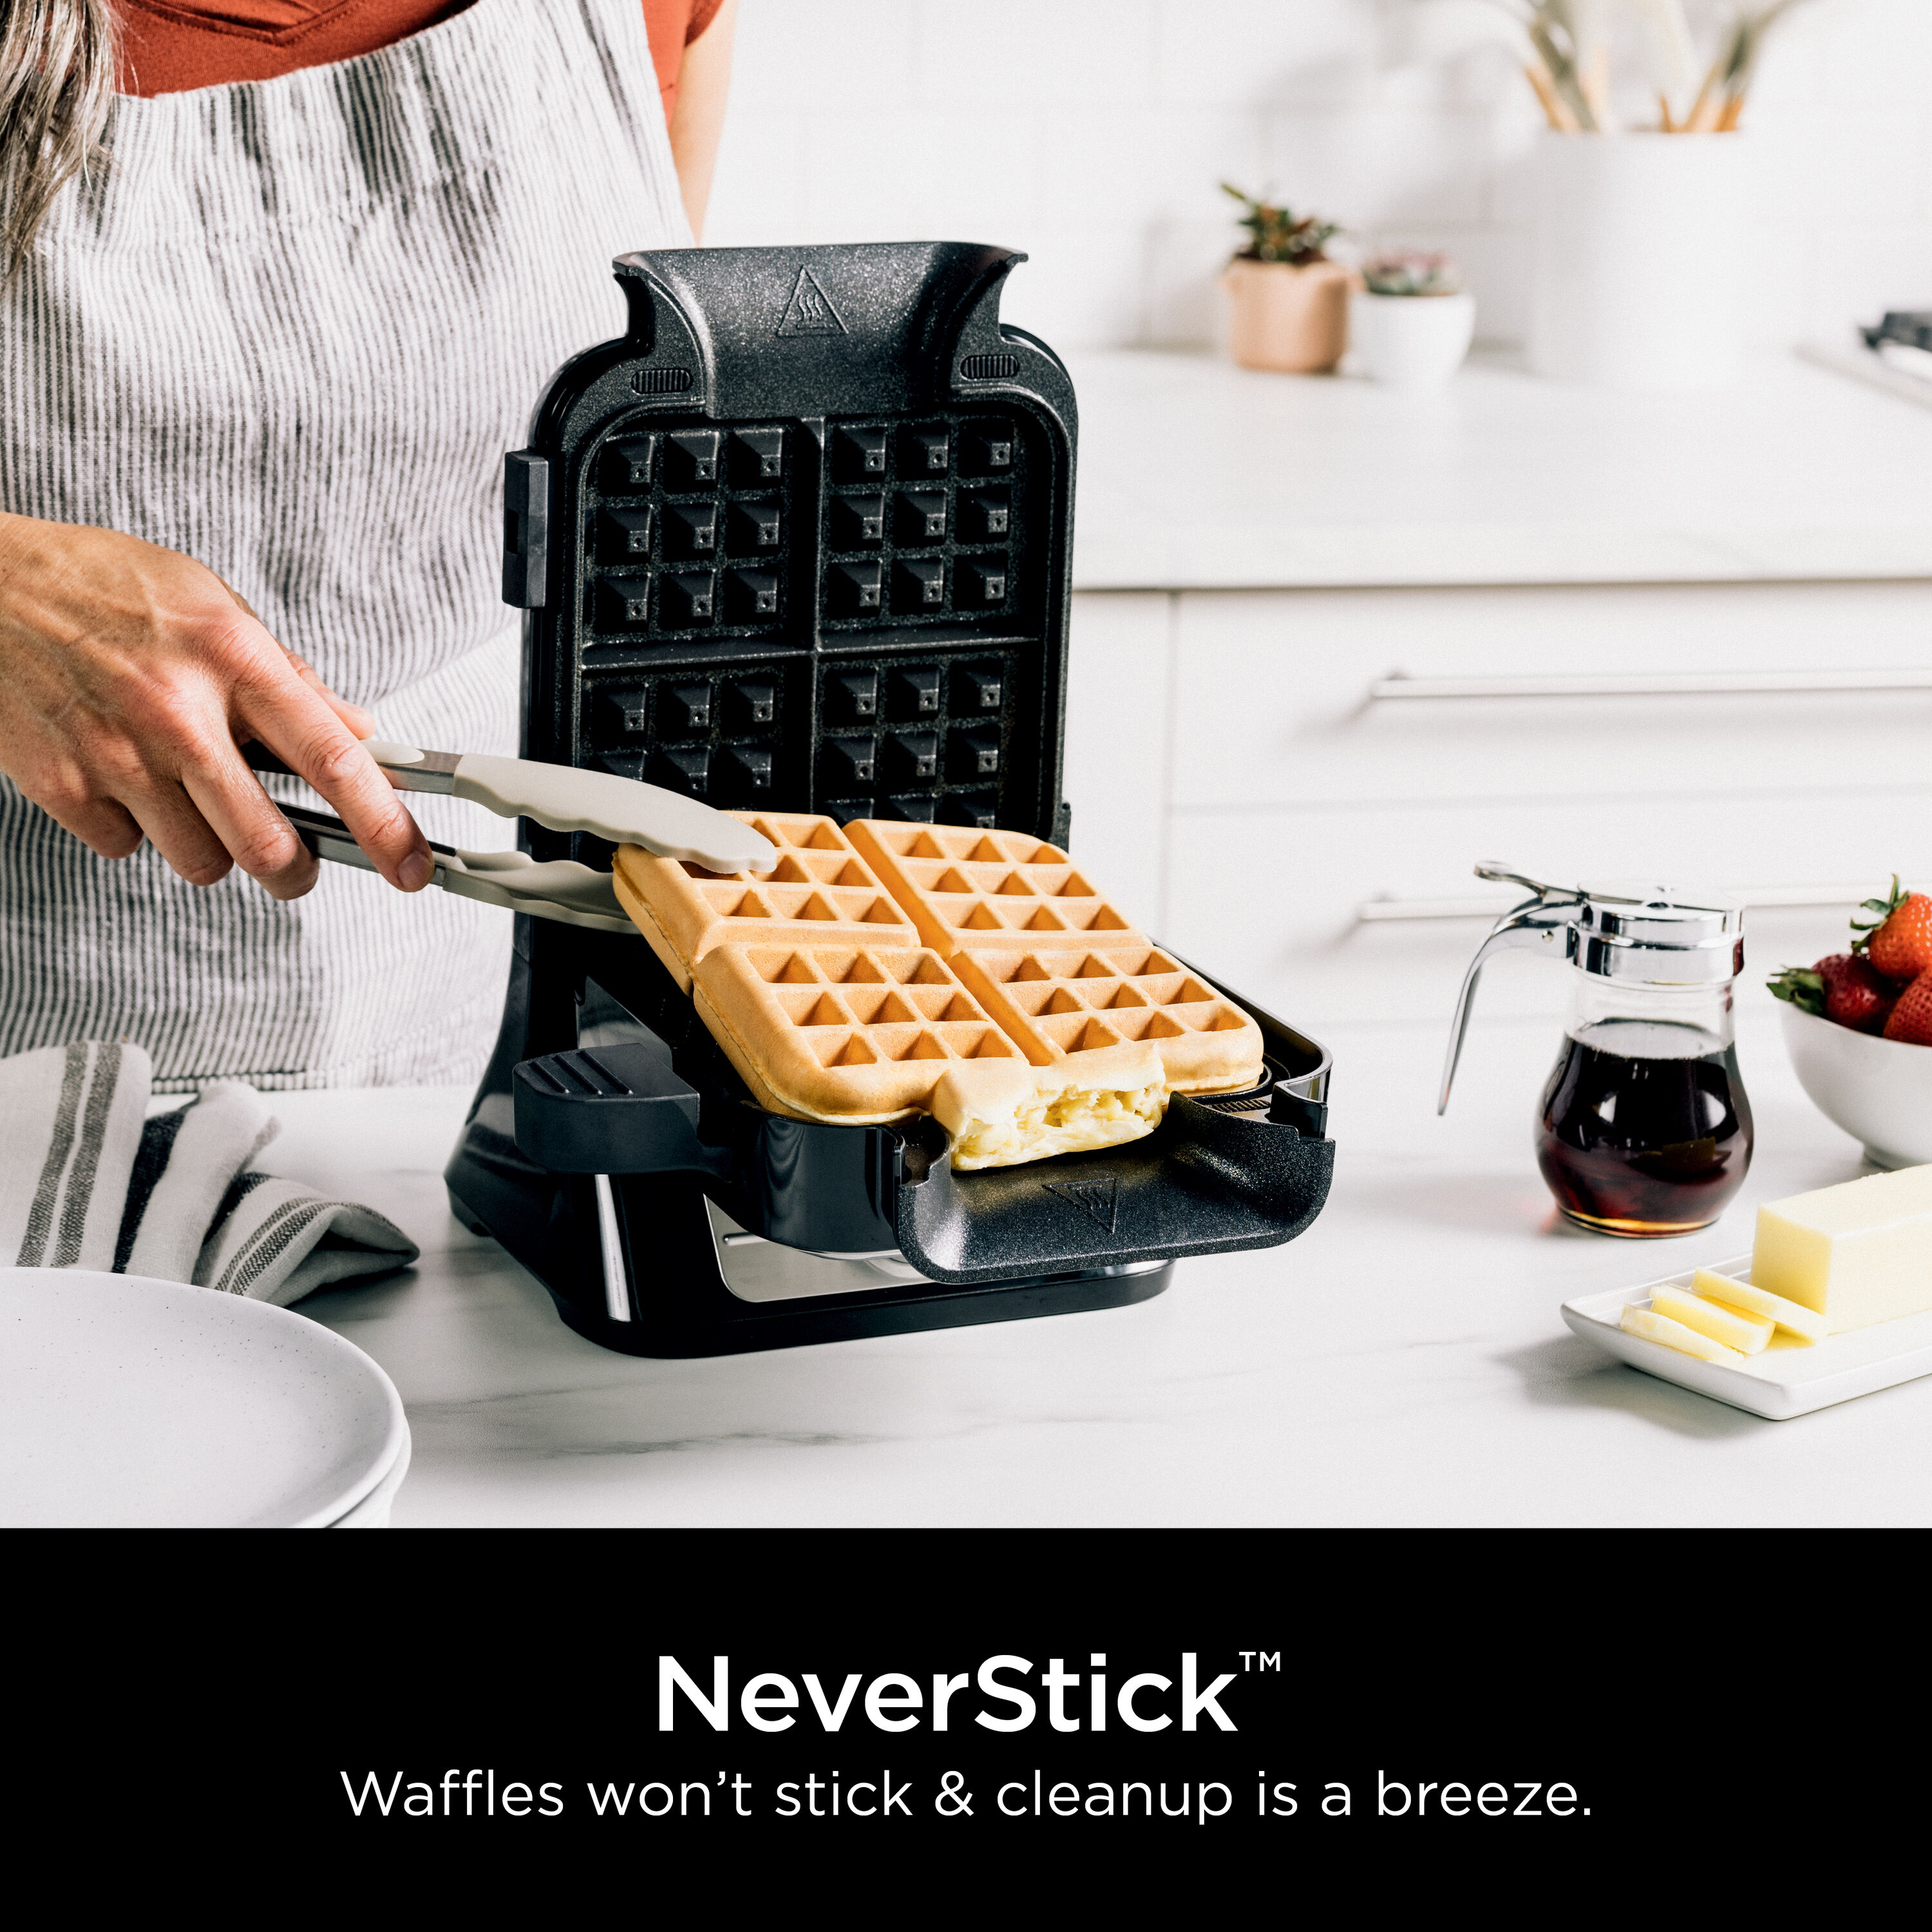  Car Mini Waffle Maker Waffle Iron for Kids 8 Different Cars  Shaped Waffles in Minutes, with Timer Knob 2 IN 1 Electric Non-Stick  Breakfast Pancake Maker with Removable Plates, Fun Gift